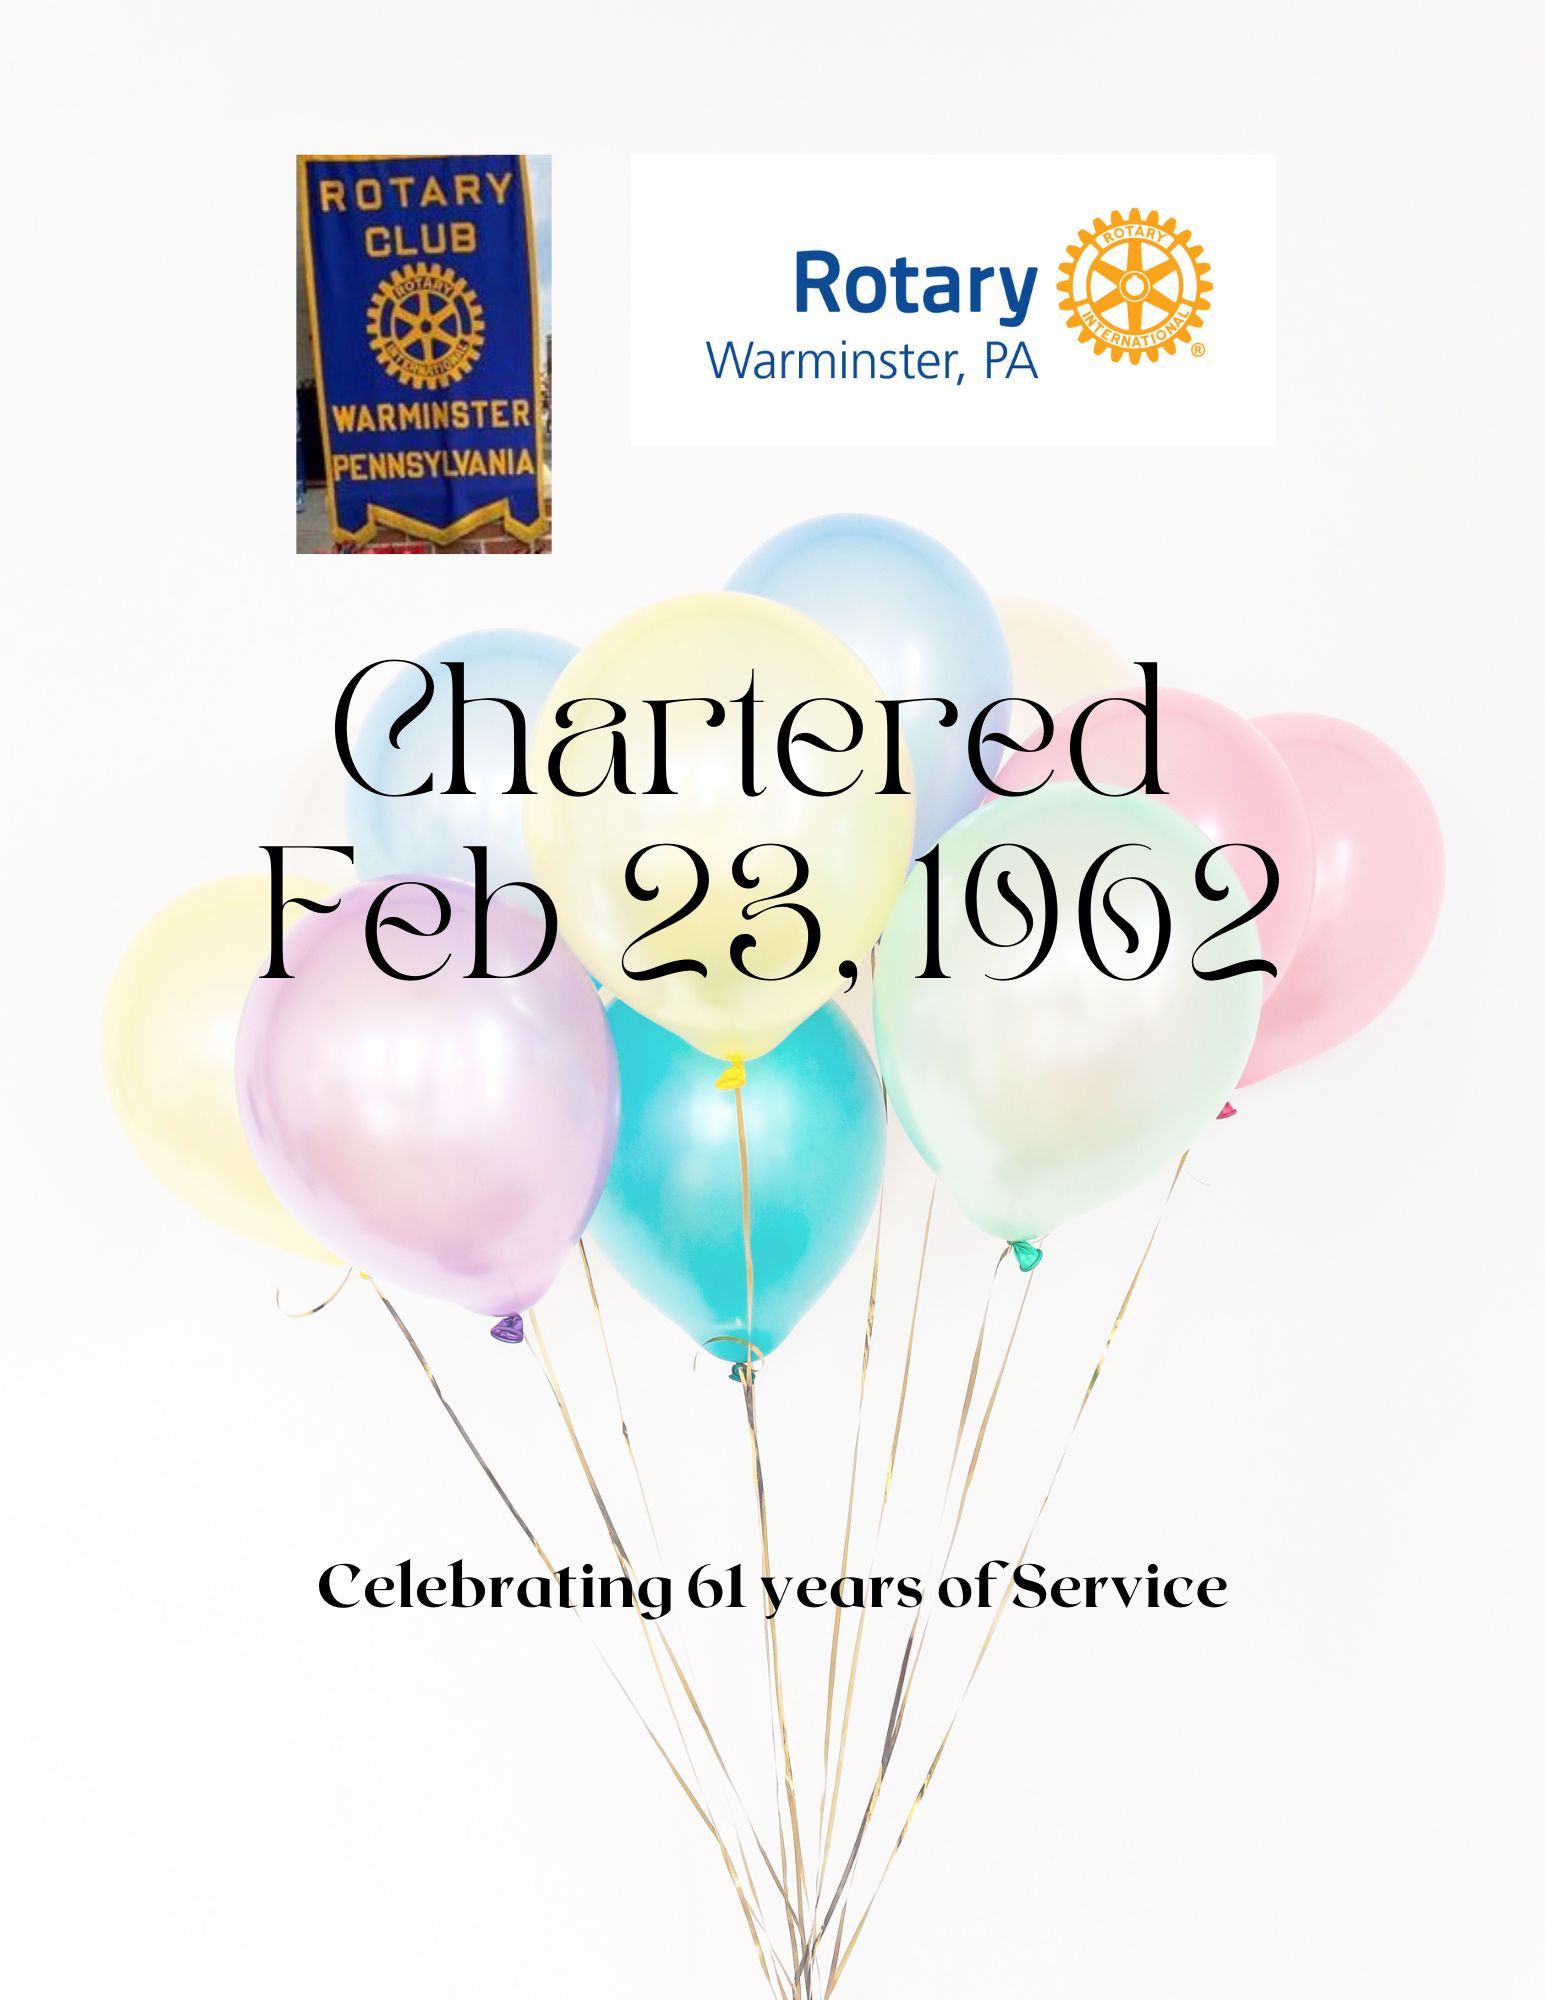 Happy Charter Day Rotary Club of Warminster